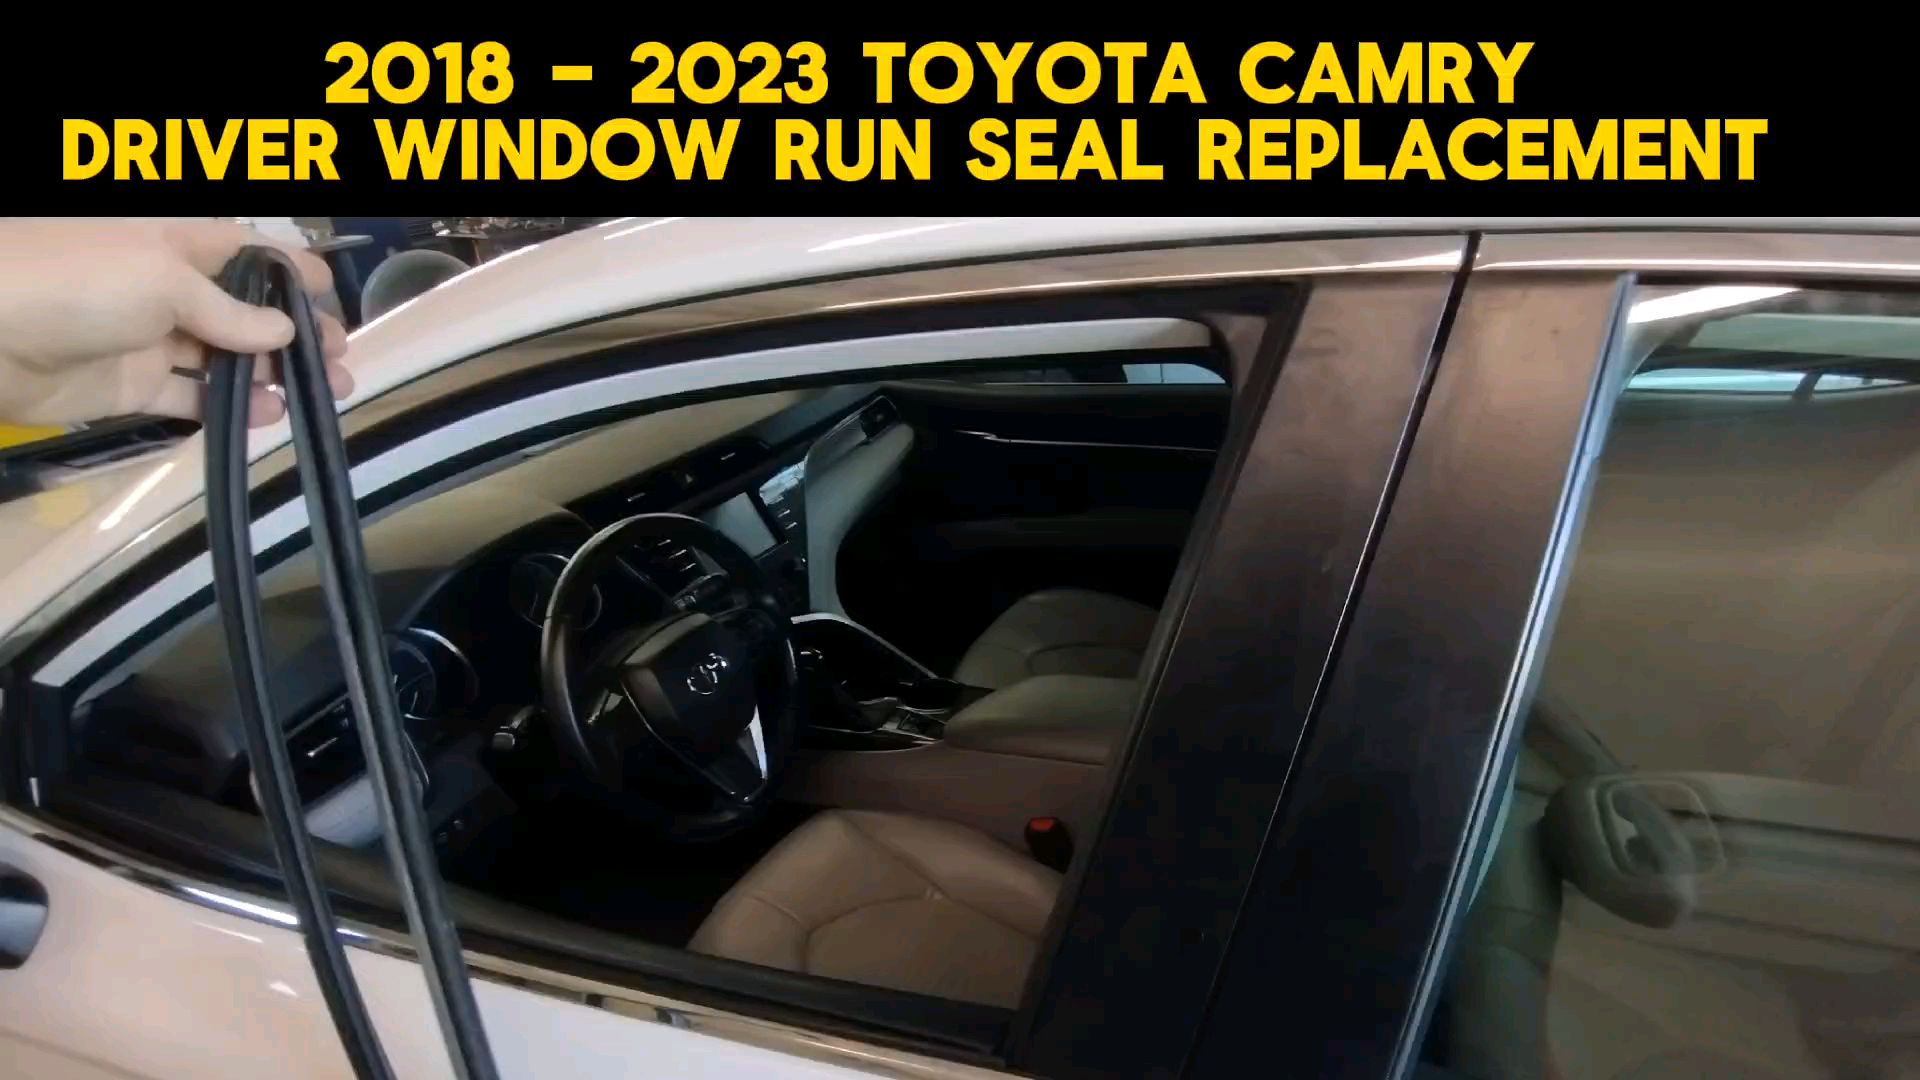 2018 – 2023 TOYOTA CAMRY DRIVER WINDOW RUN SEAL WEATHERSTRIP REPLACEMENT TUTORIAL